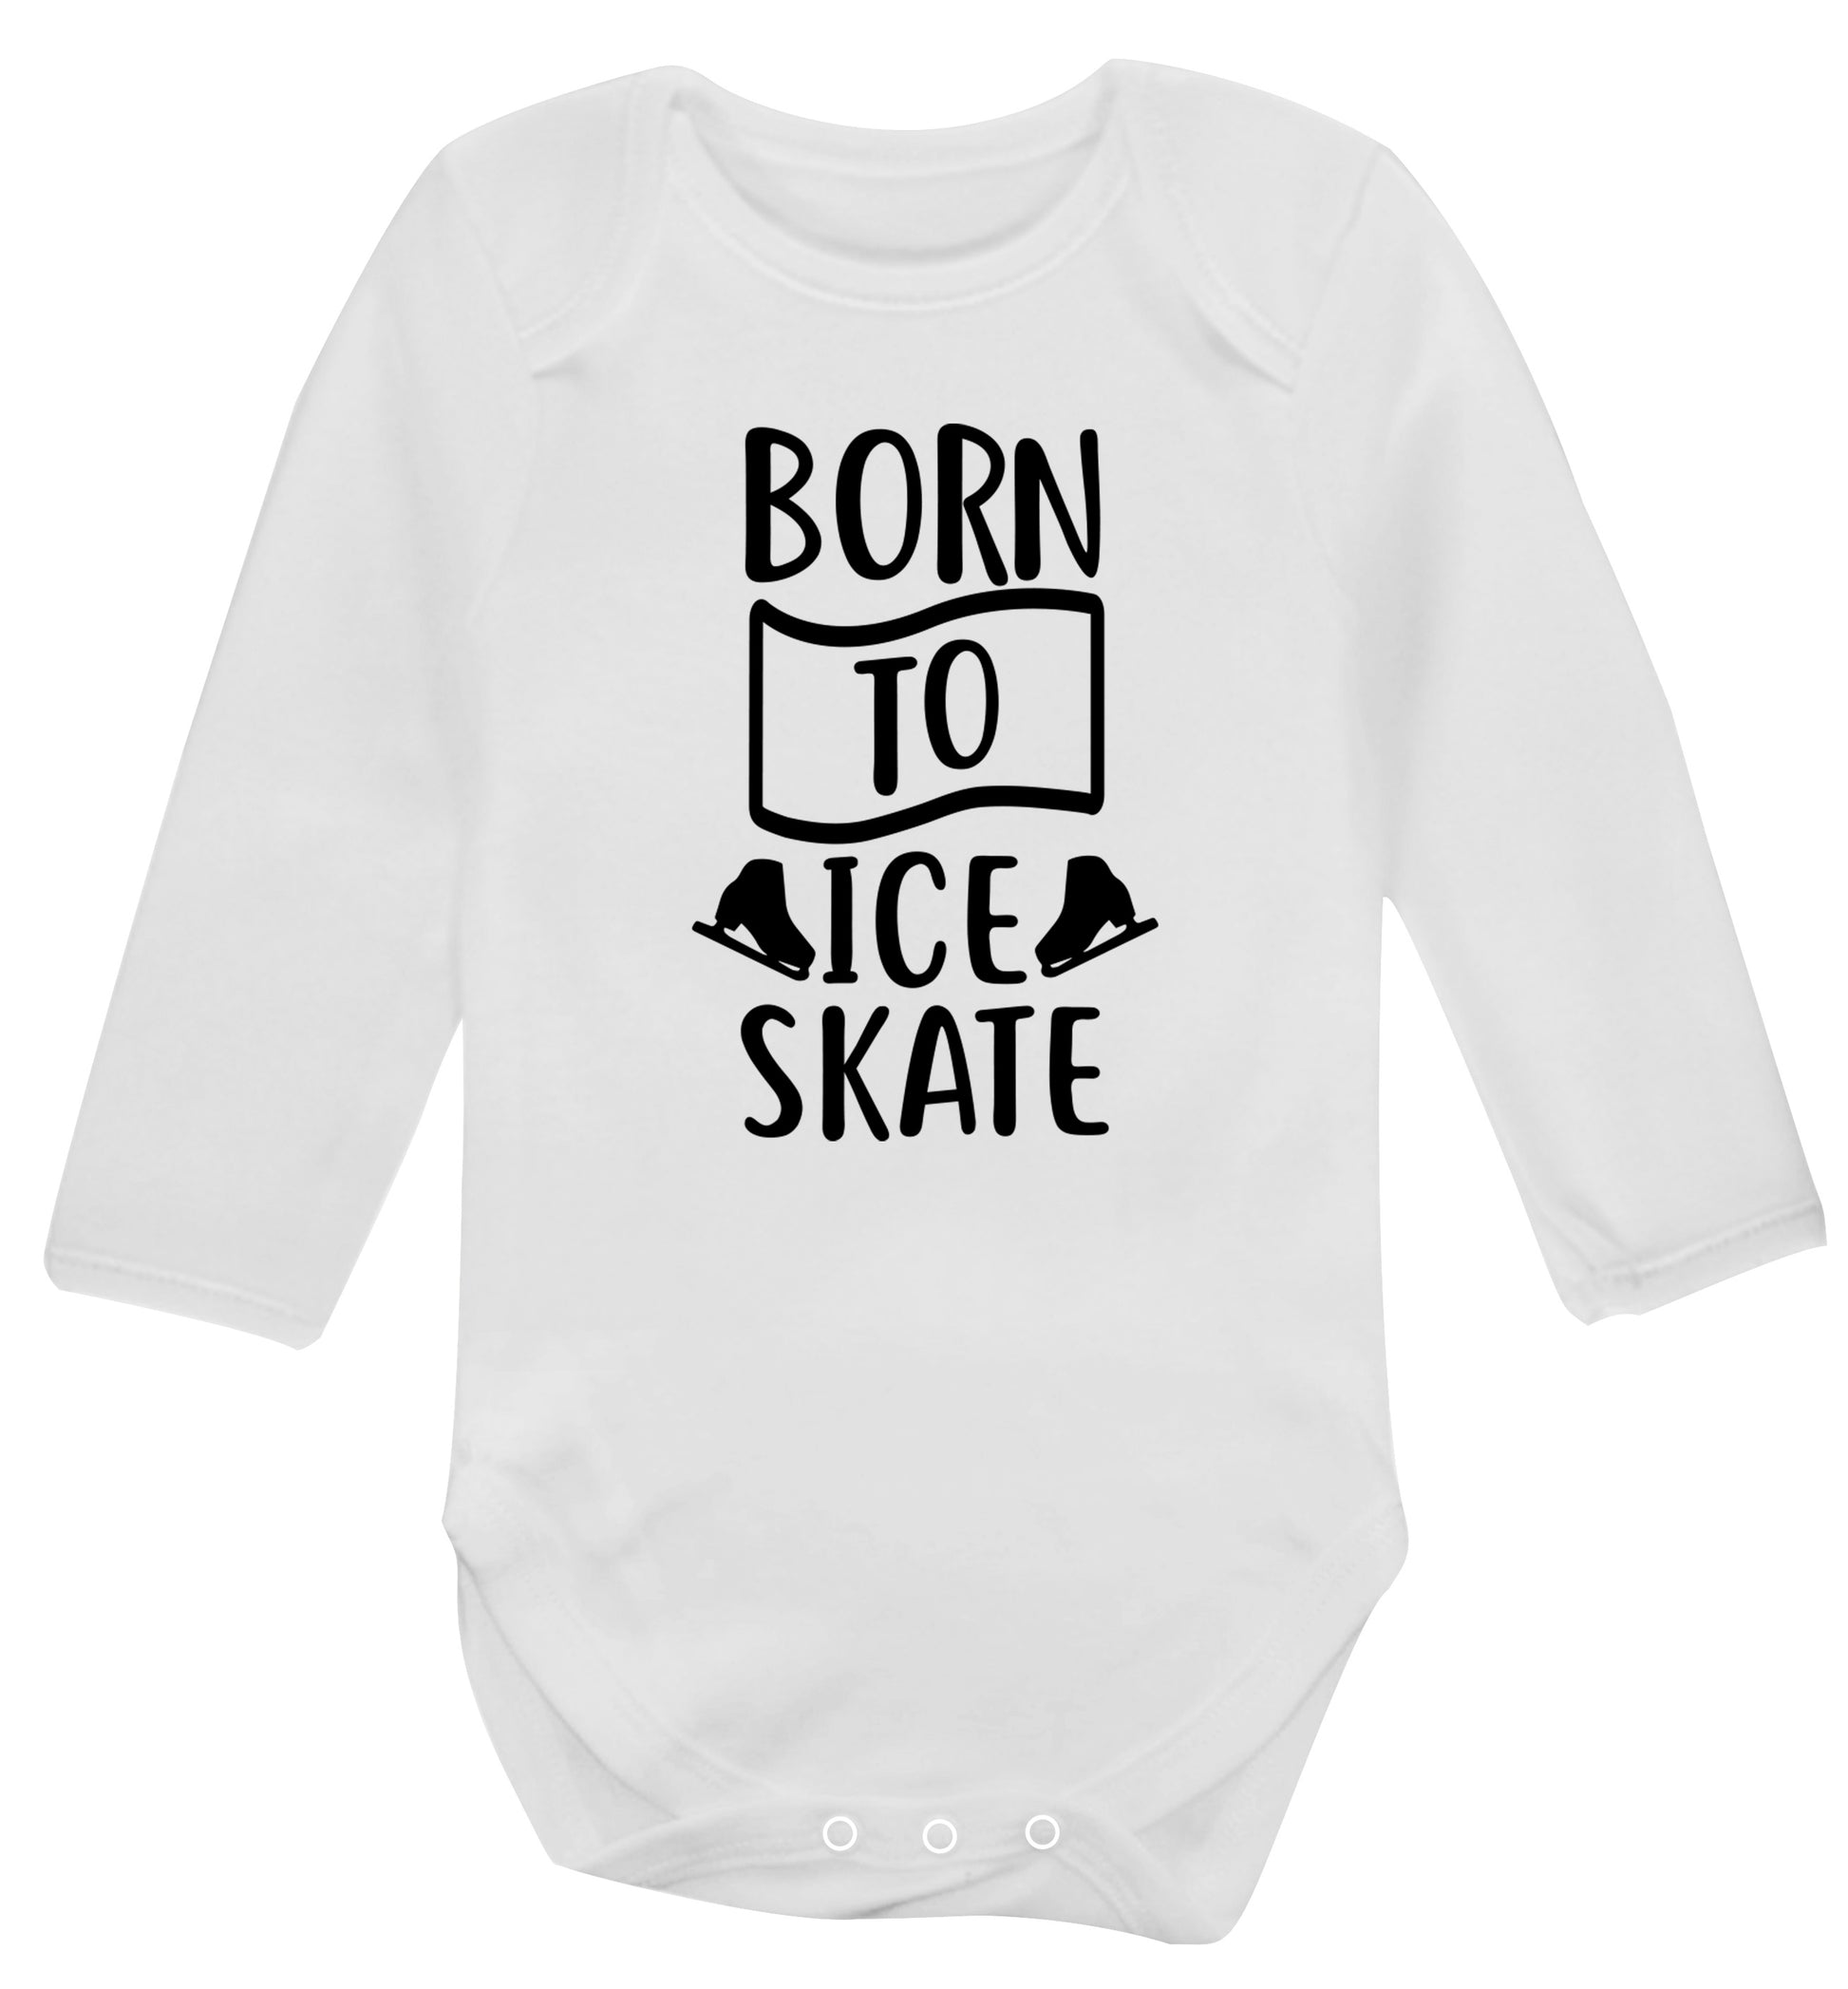 I ice skate because I like it not because I'm good at it Baby Vest long sleeved white 6-12 months